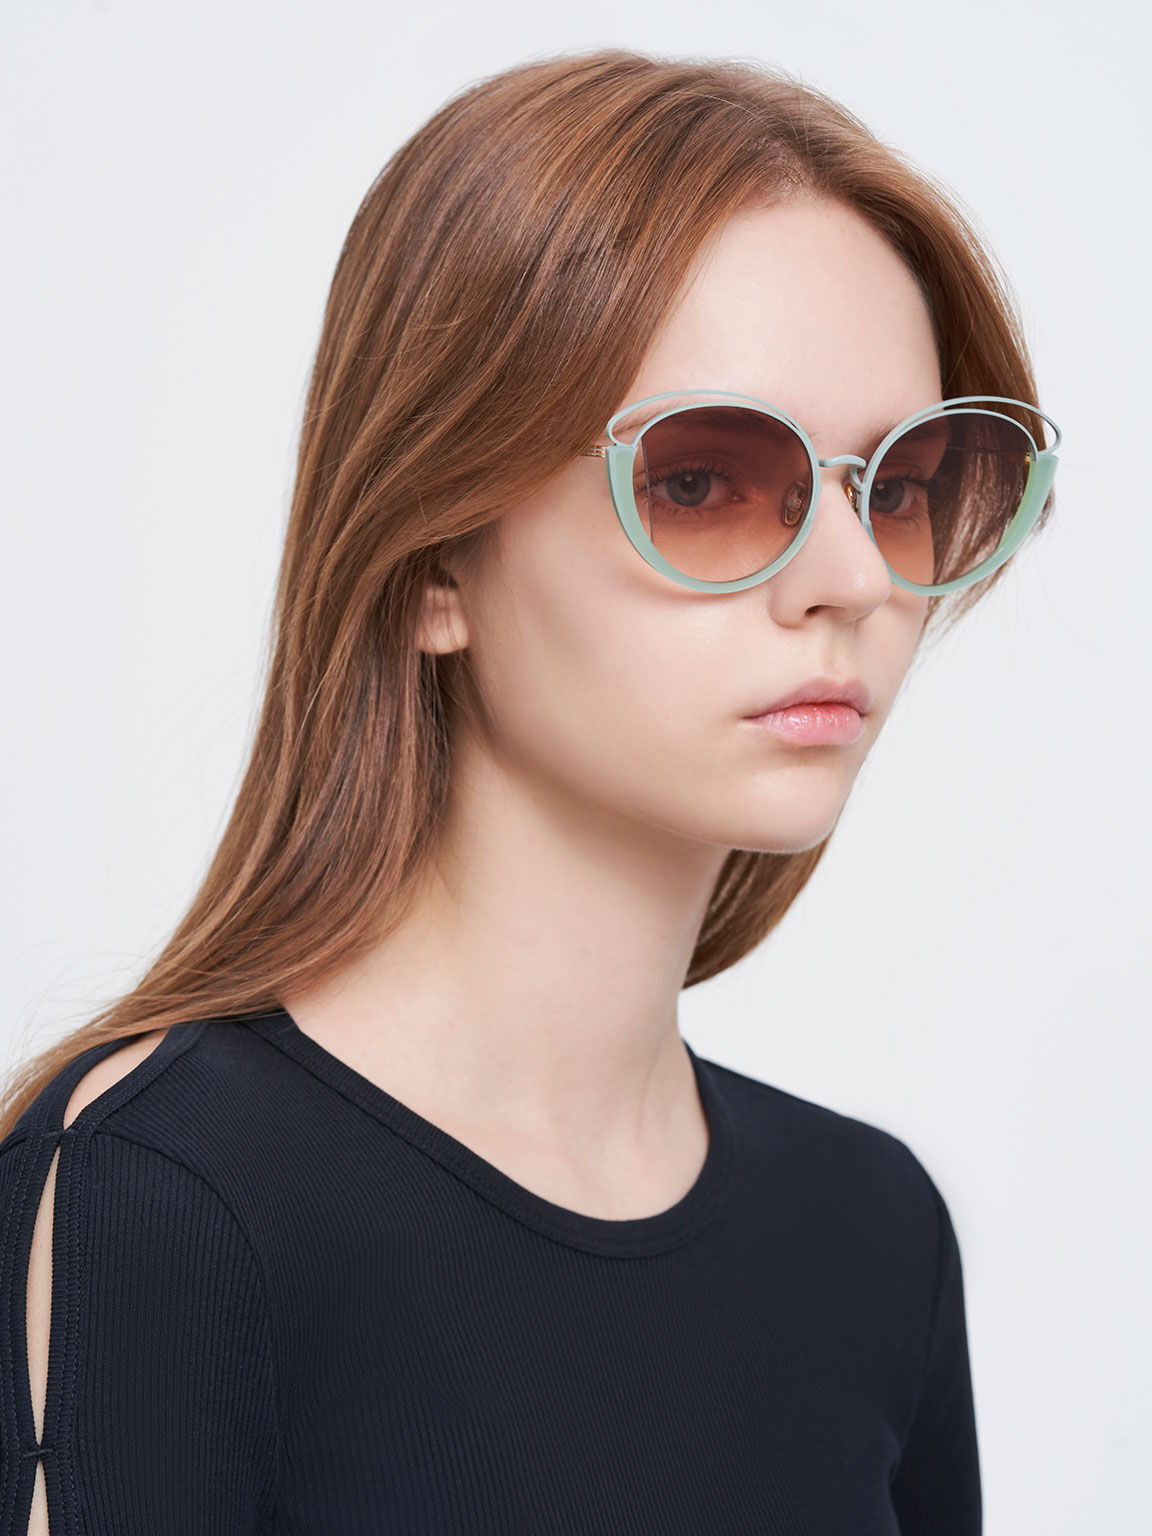 Cut-Out Wireframe Oval Sunglasses, Mint Green, hi-res